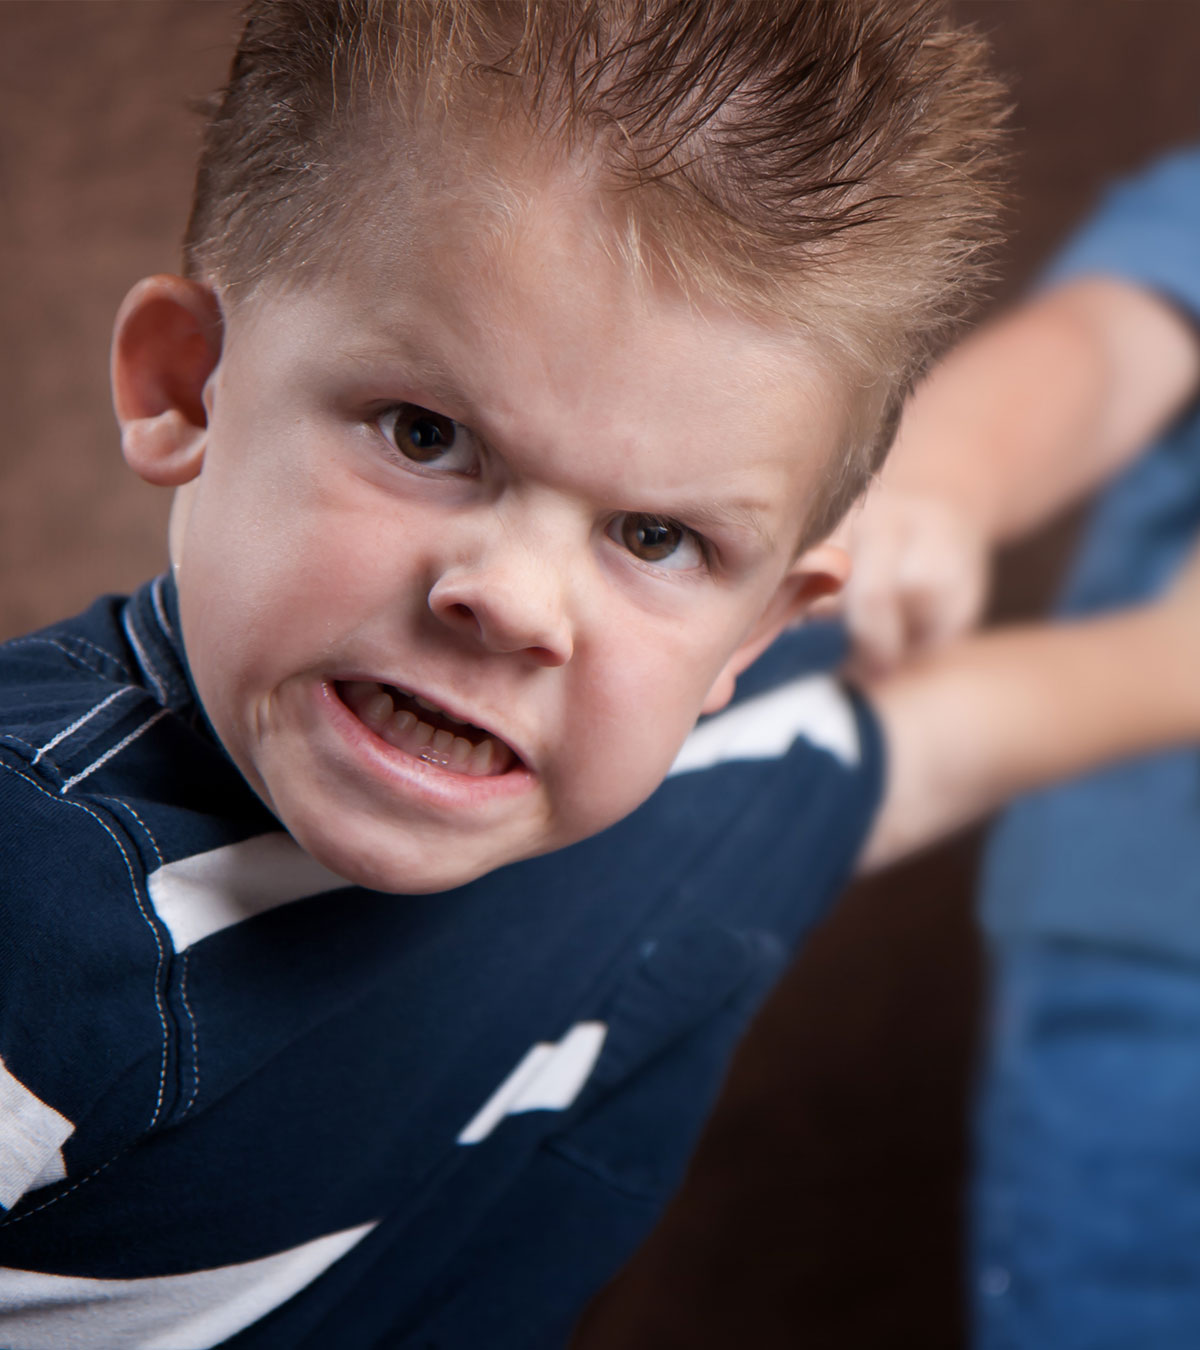 Toddler Aggression: Causes, Tips To Prevent & When To Worry